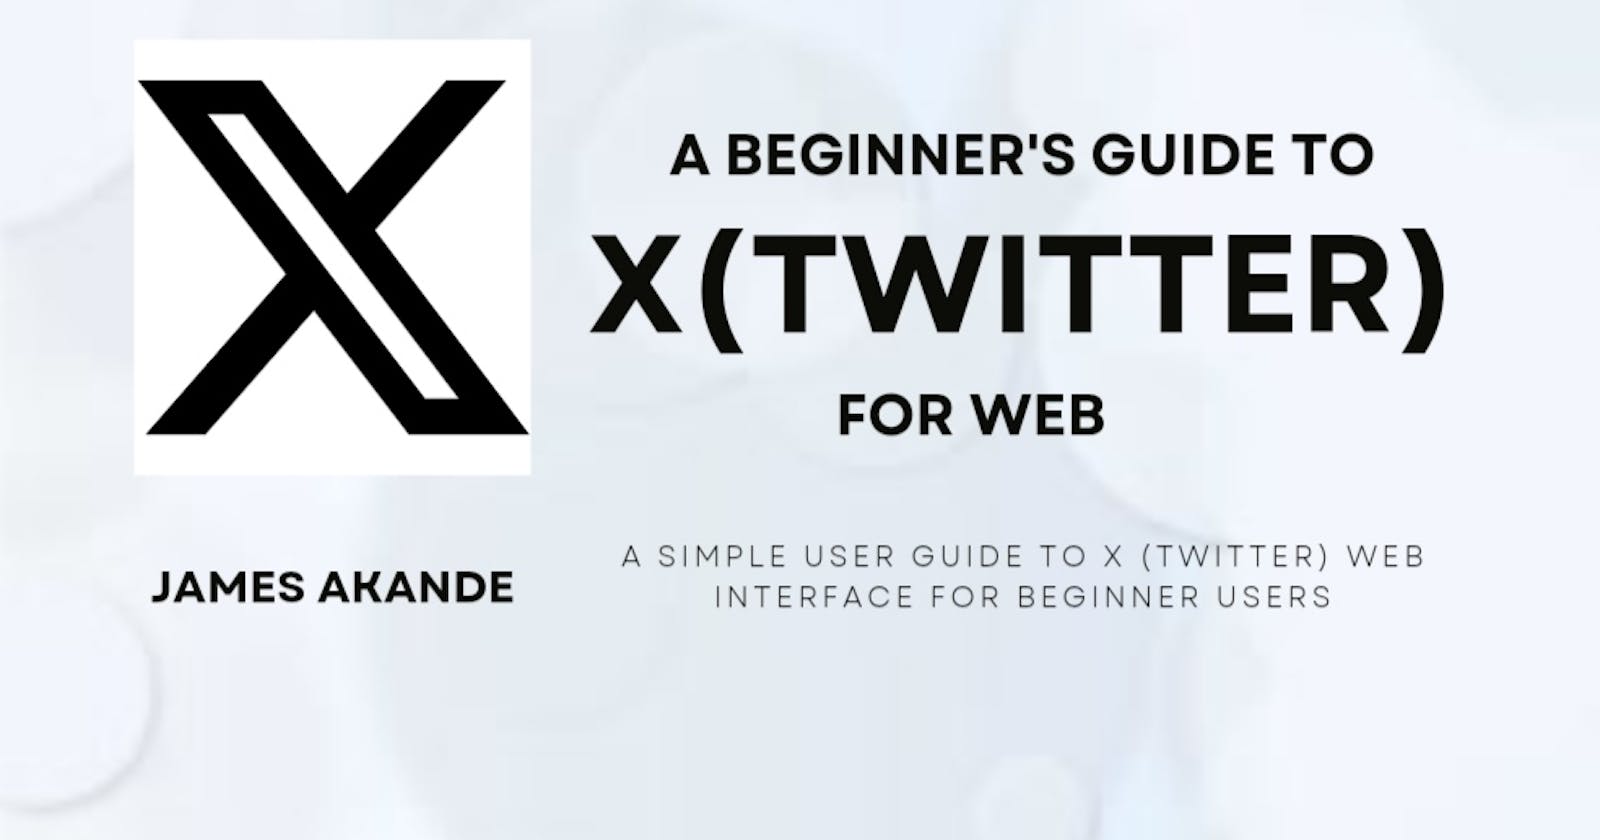 Getting Started on Twitter: A Beginner's Guide